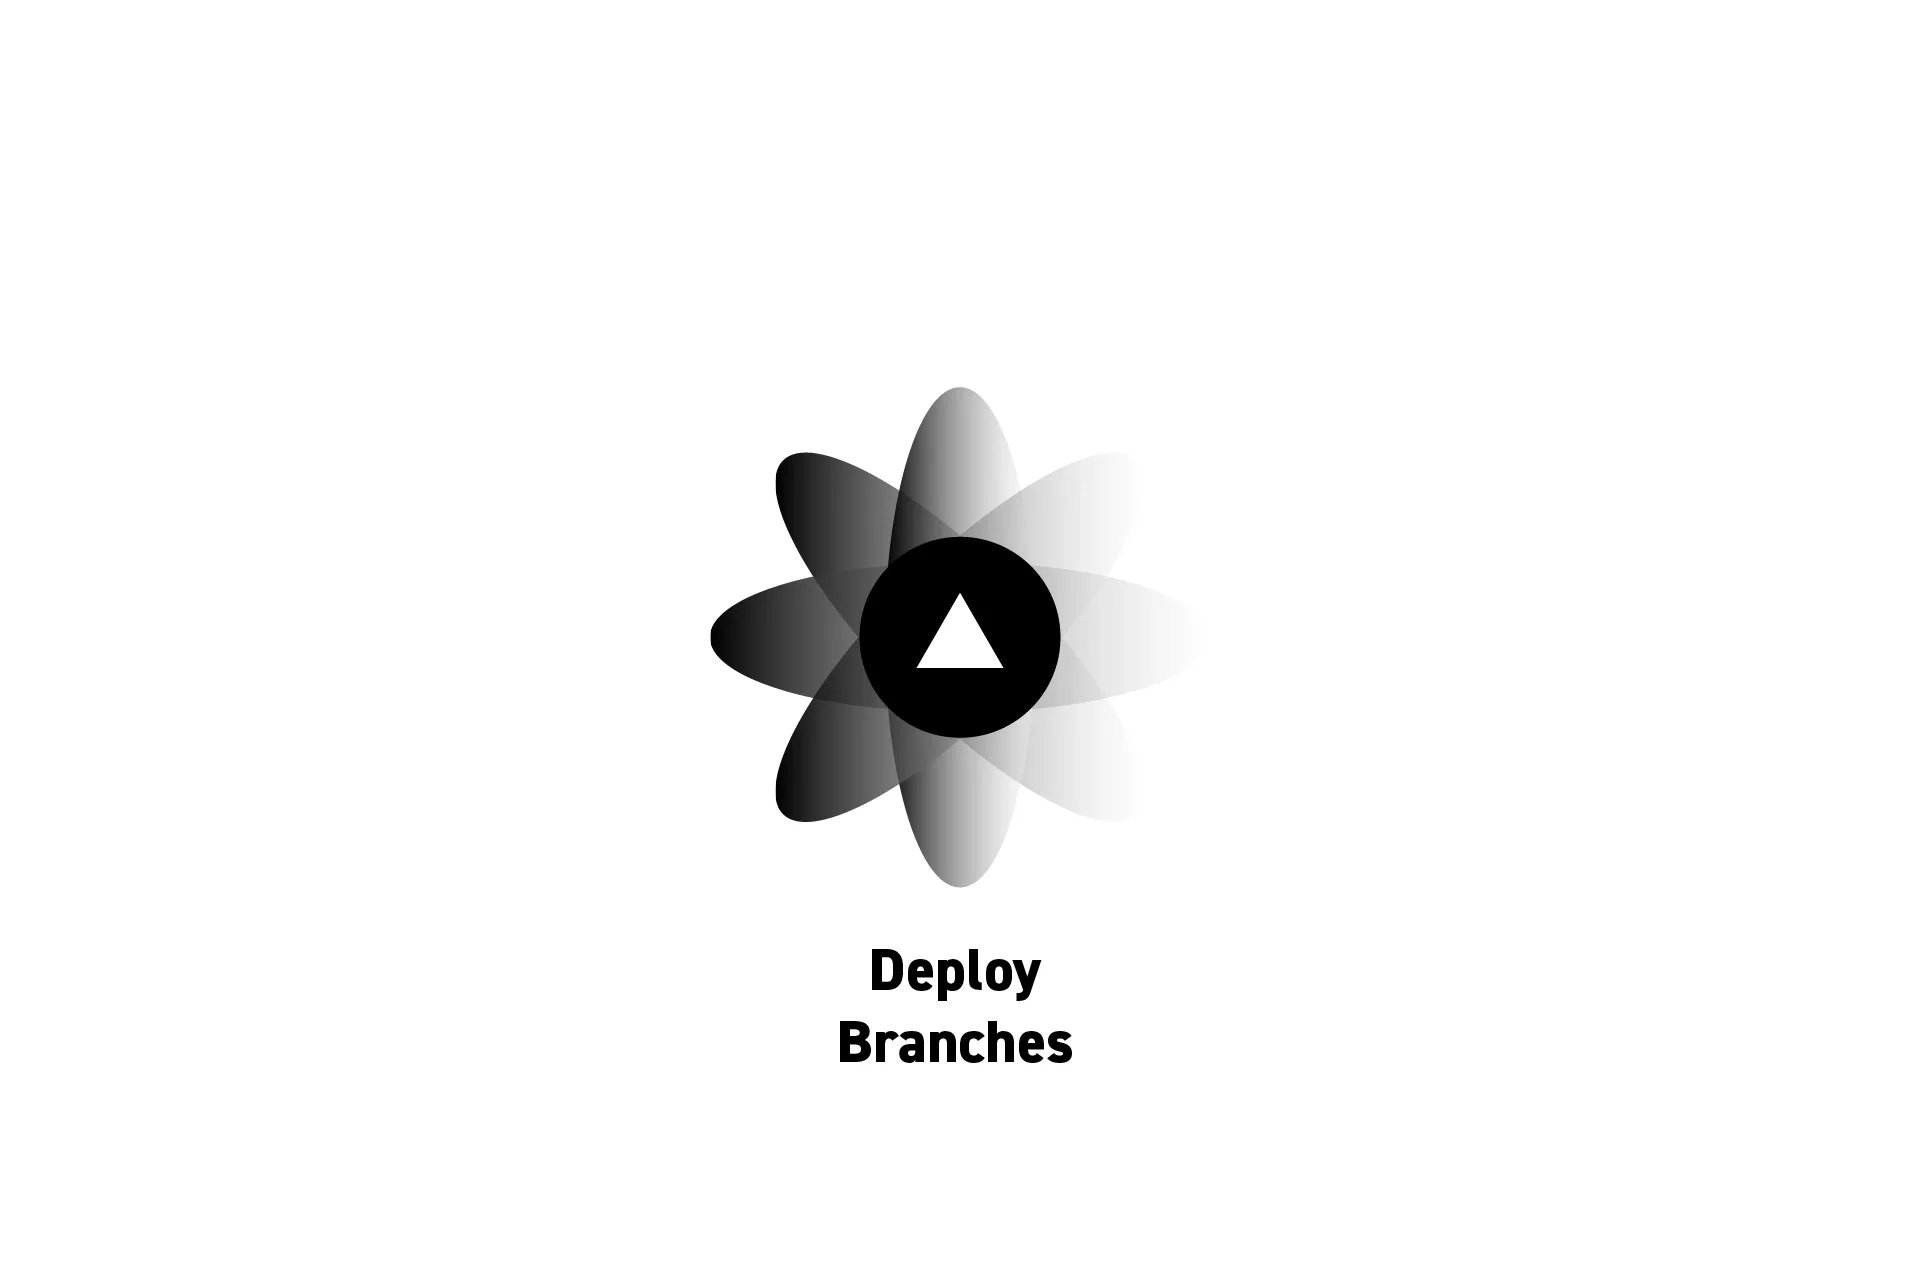 A flower that represents Vercel with the text "Deploy Branches” beneath it.